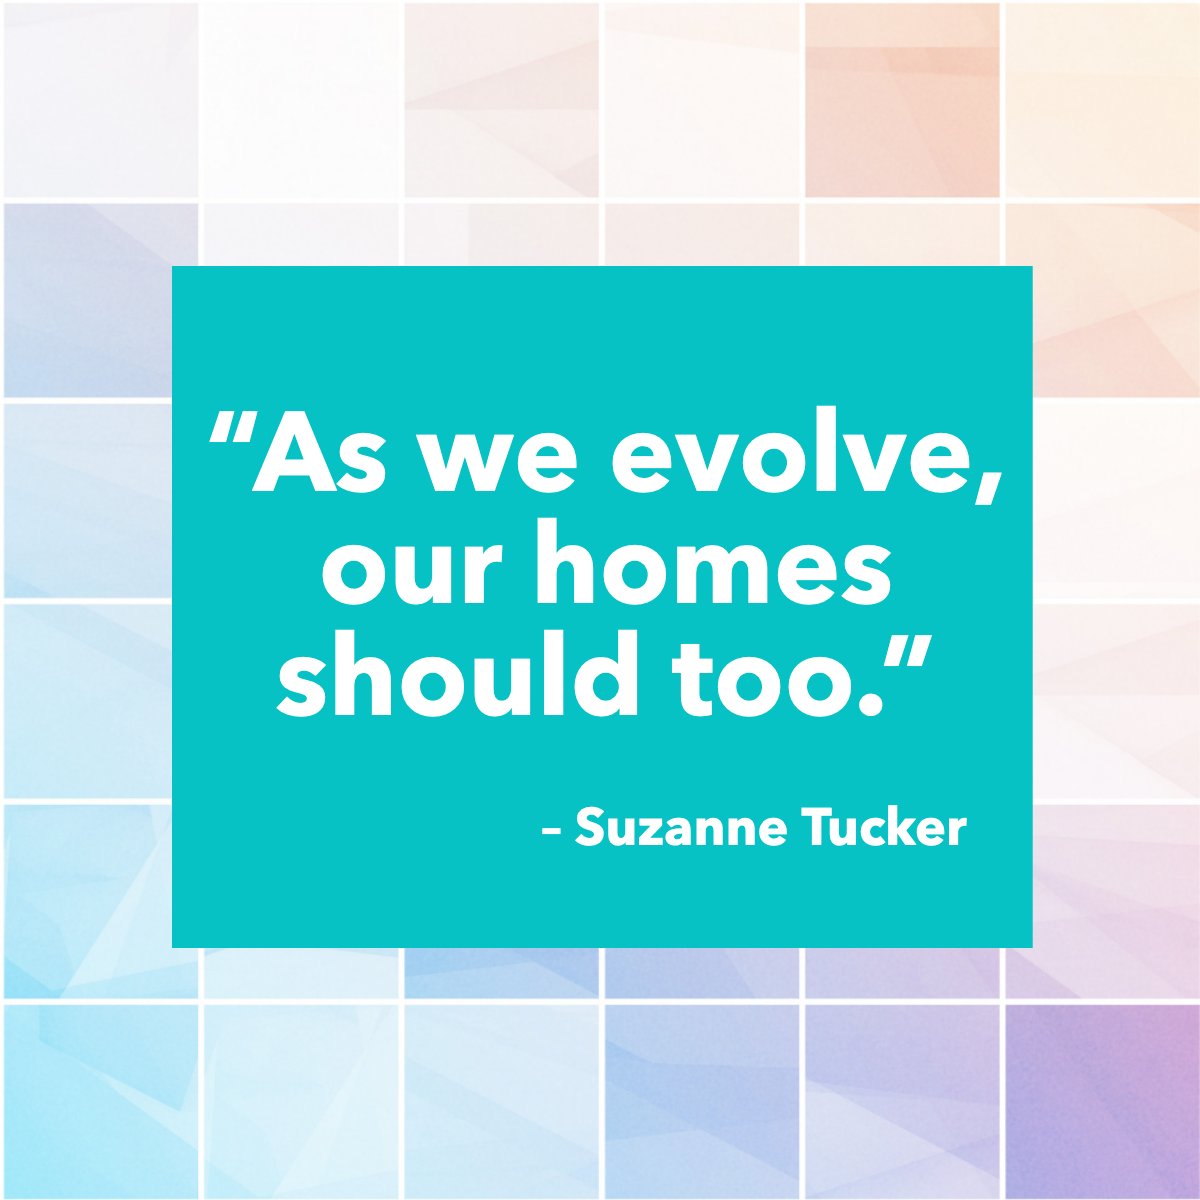 'As we evolve, our homes should too.' 
― Suzanne Tucker 📖

 #quoteoftheday #realestate #realestatequotes #quotefortoday #SuzanneTucker
 #AmericasMortgageSolutions #christianpenner #onestopbrokershop #mortgagebrokerwestpalmbeach #epicrealeststedeals